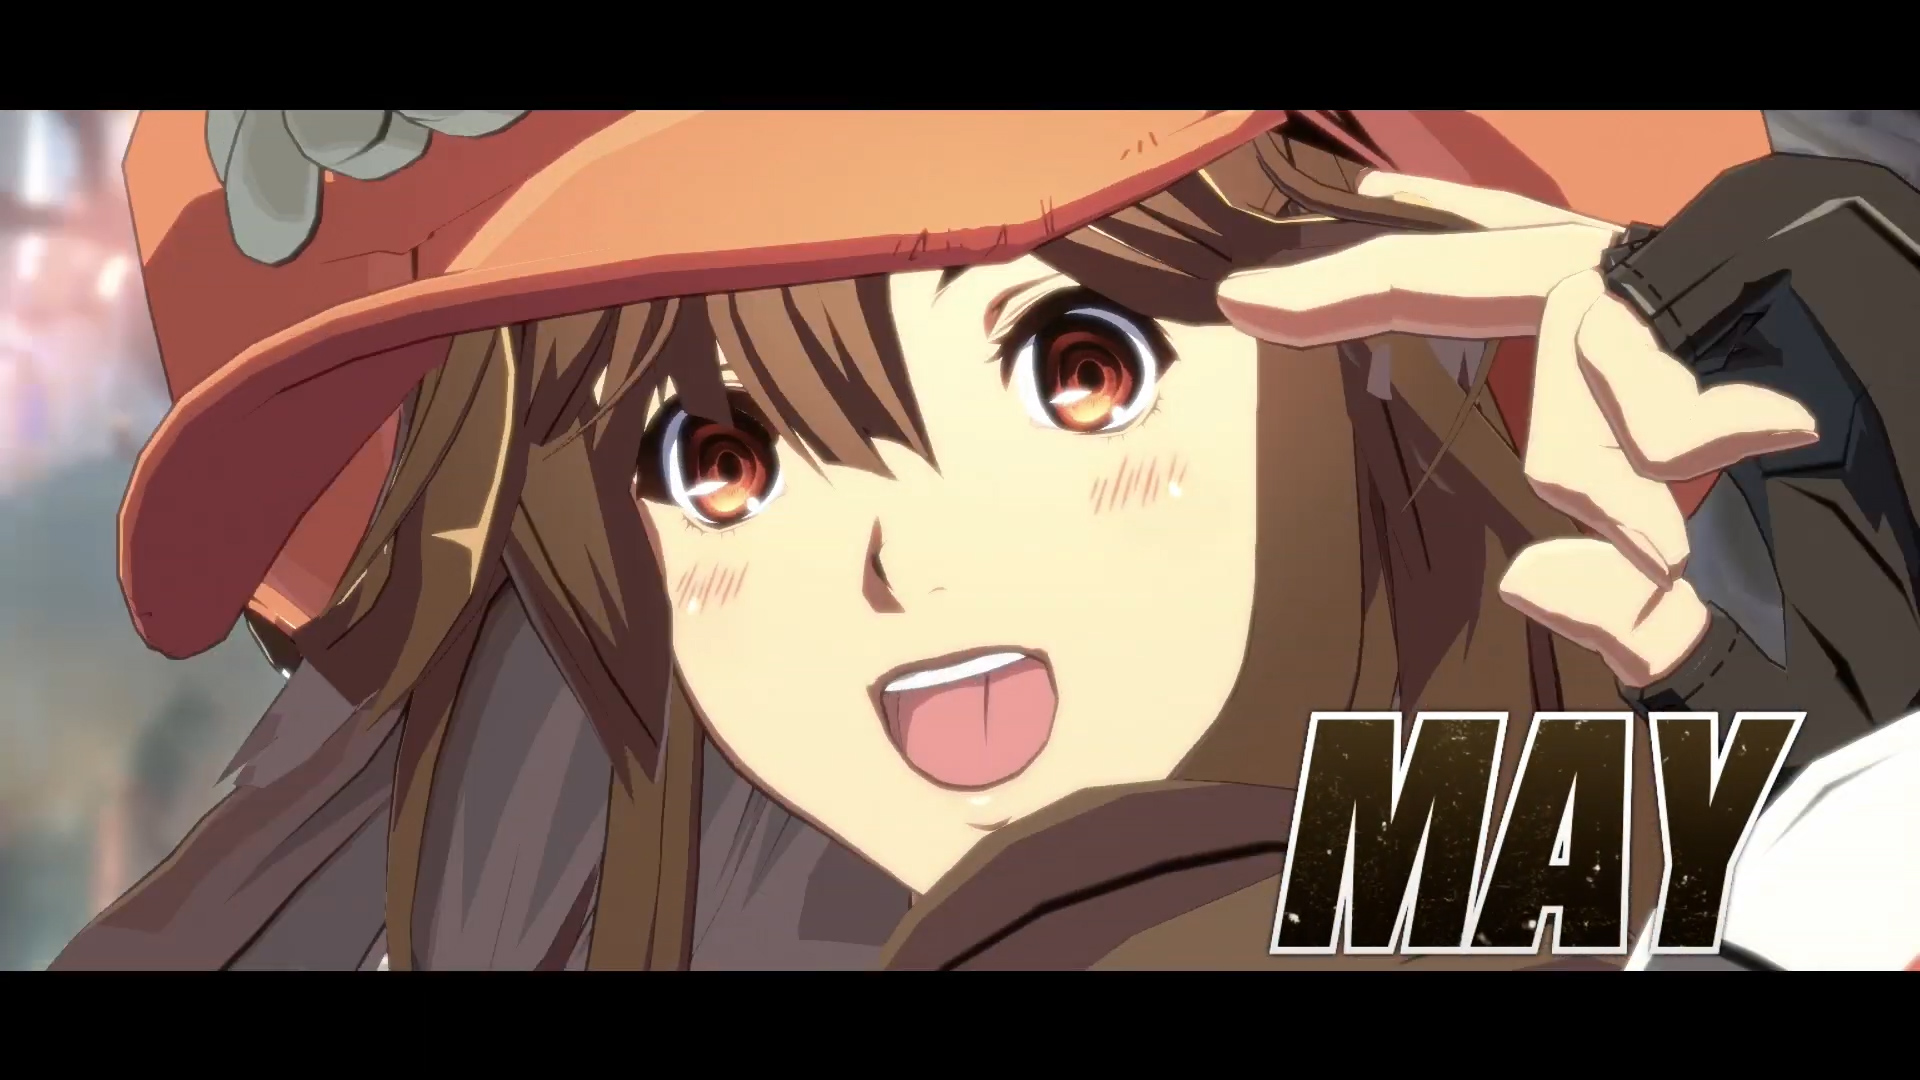 May revealed as the latest addition to Guilty Gear roster